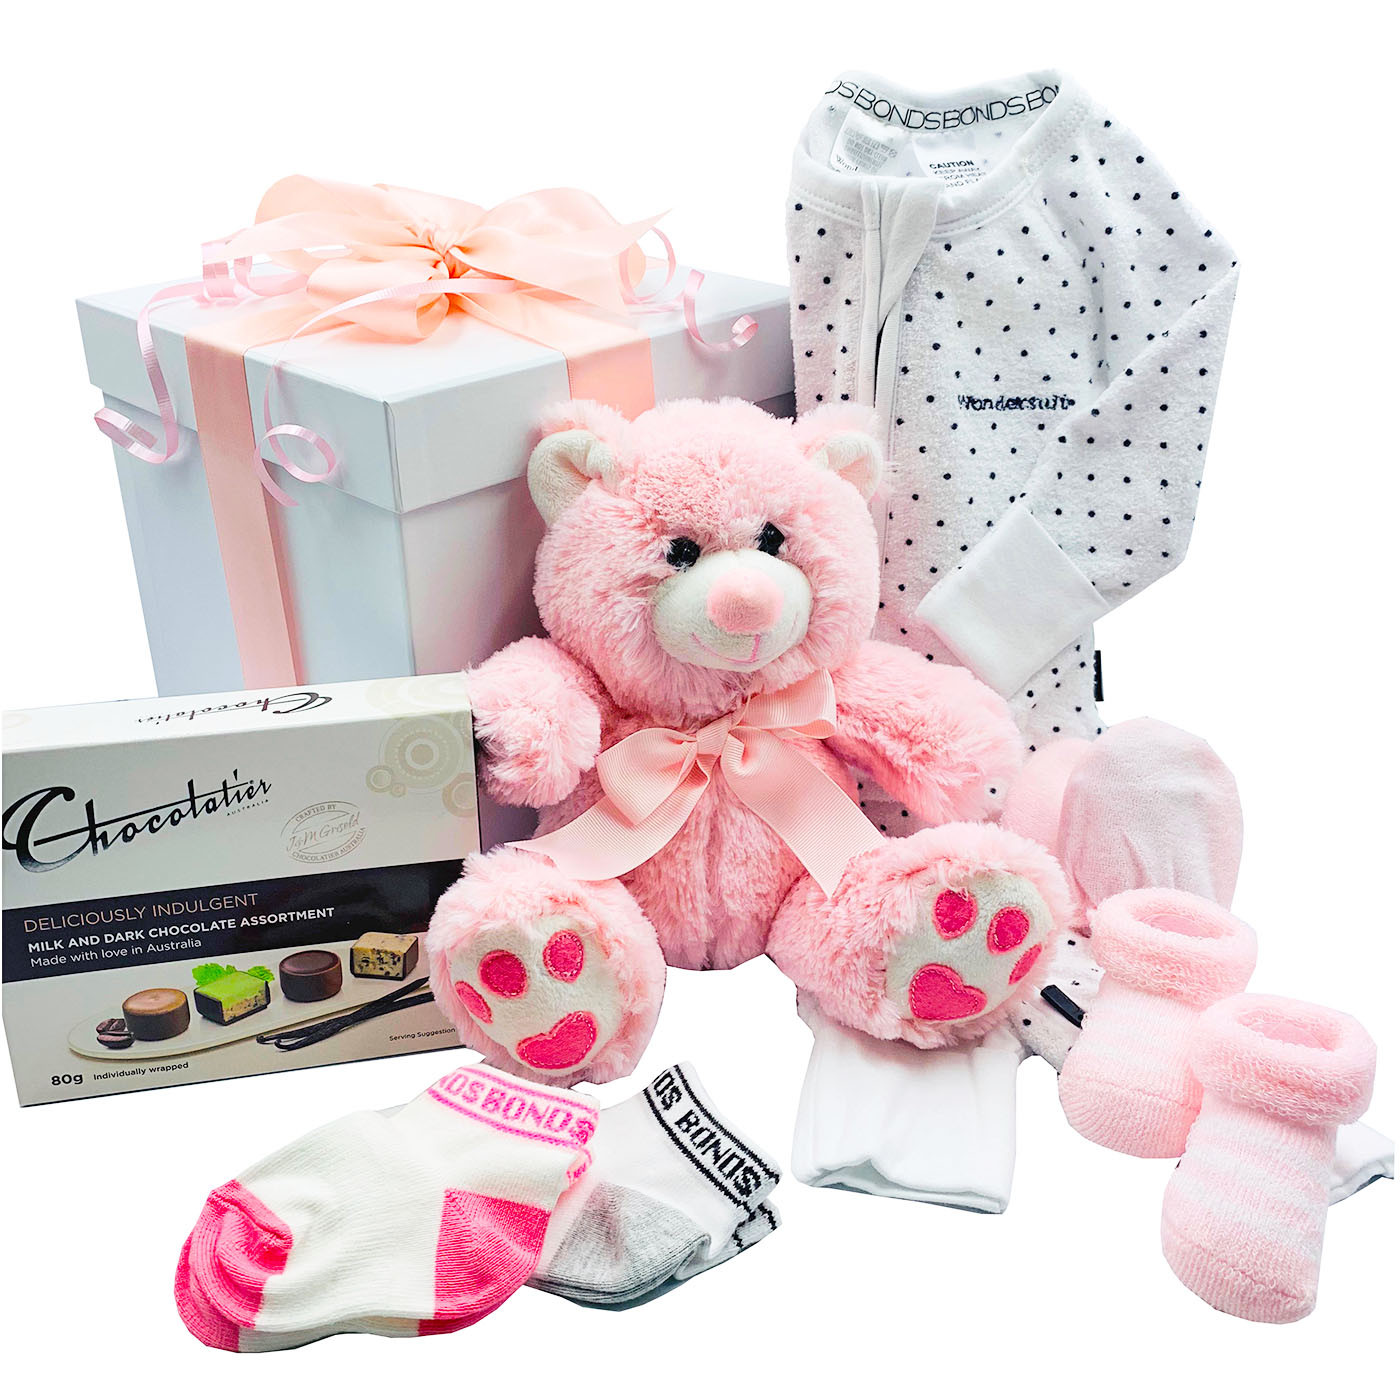 New Baby Gifts Delivered
 Baby Girl New Mum Gift Set Australia Wide Next Day